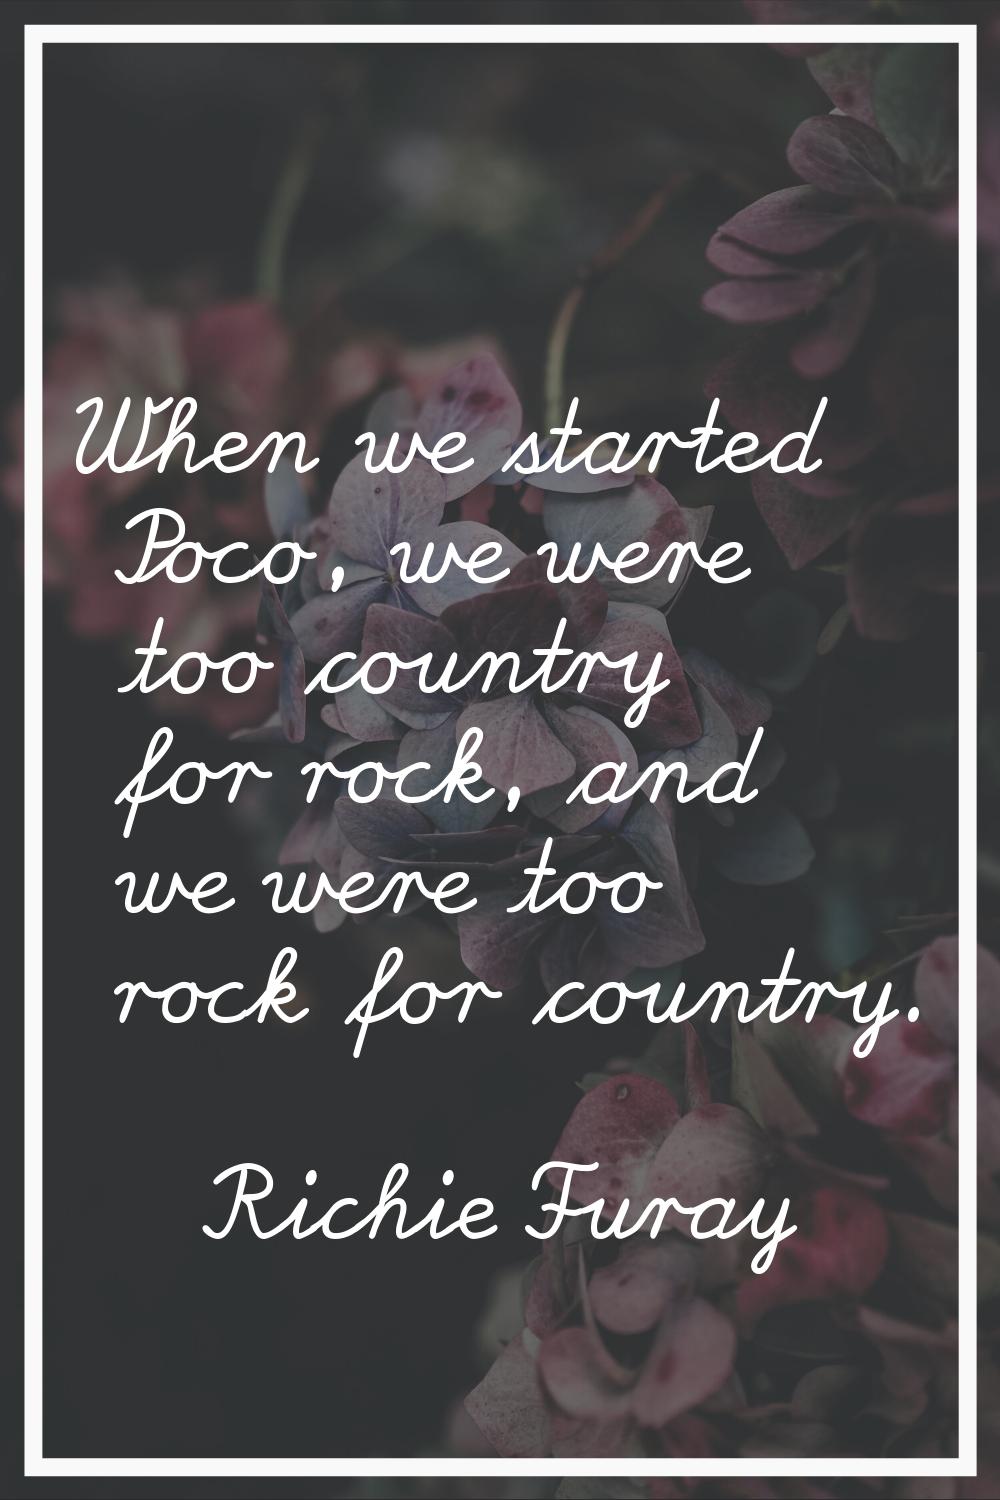 When we started Poco, we were too country for rock, and we were too rock for country.